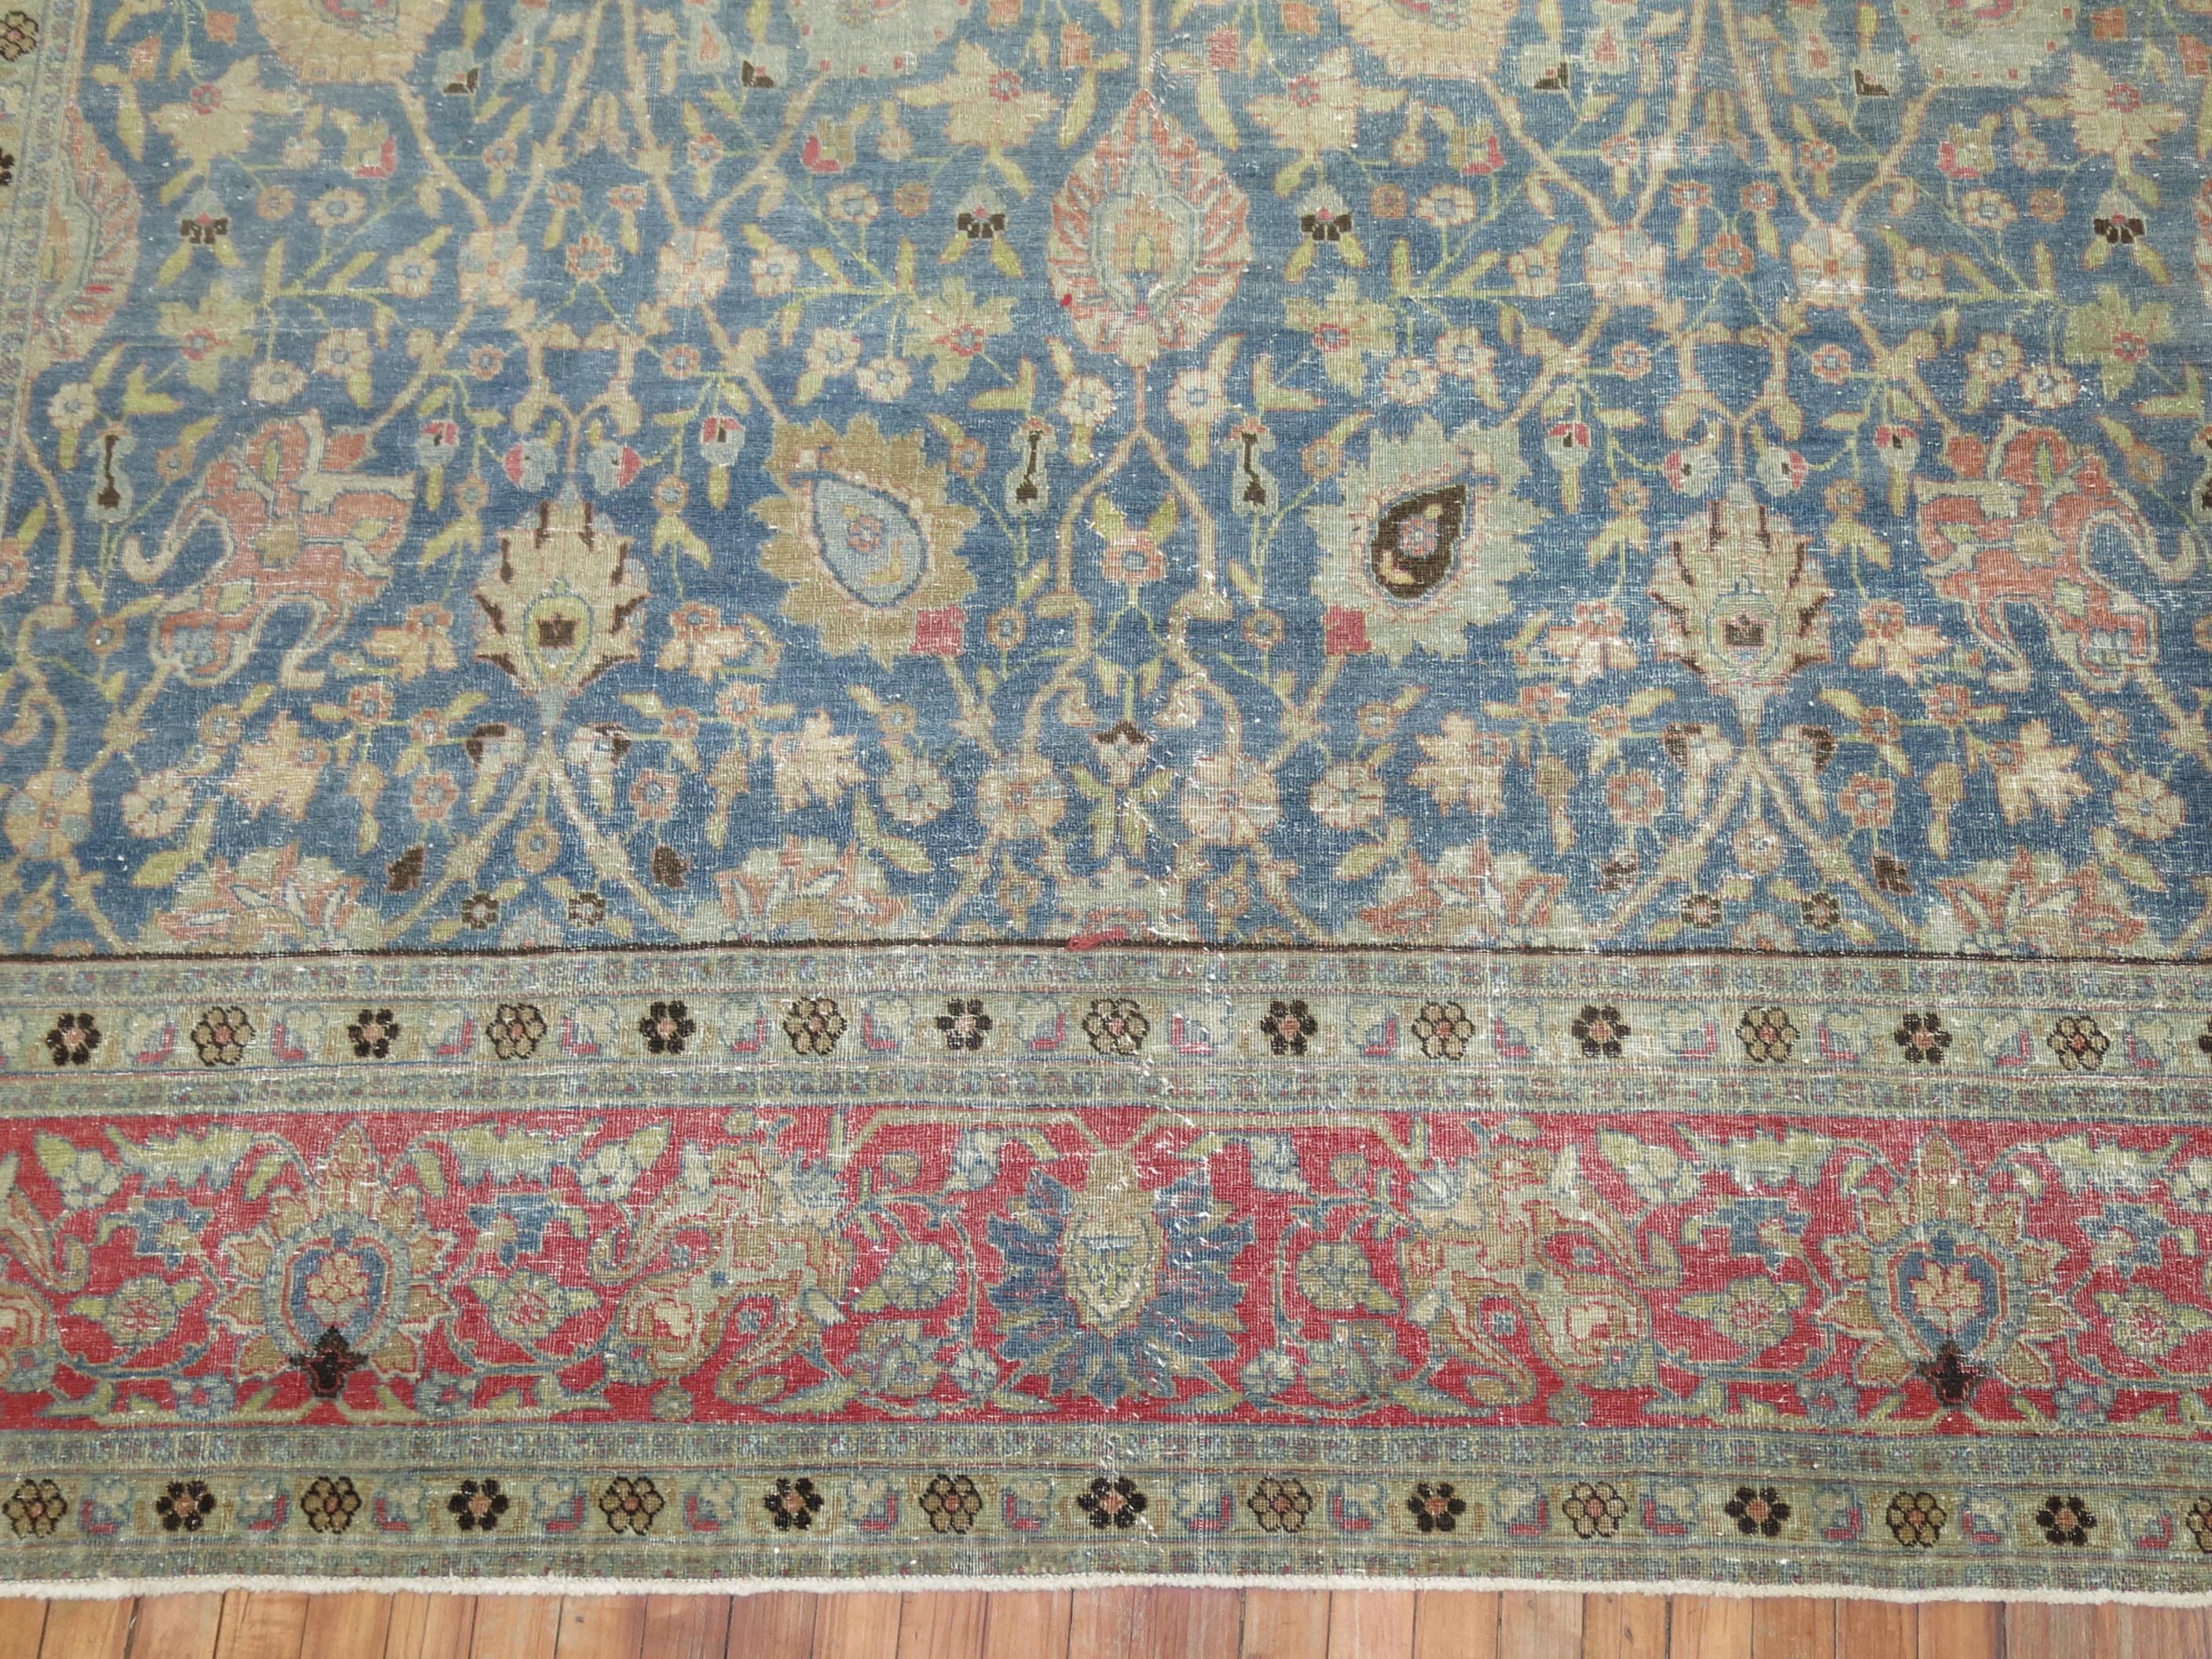 Wool Square Antique Persian Tabriz Rug in Blues and Pink